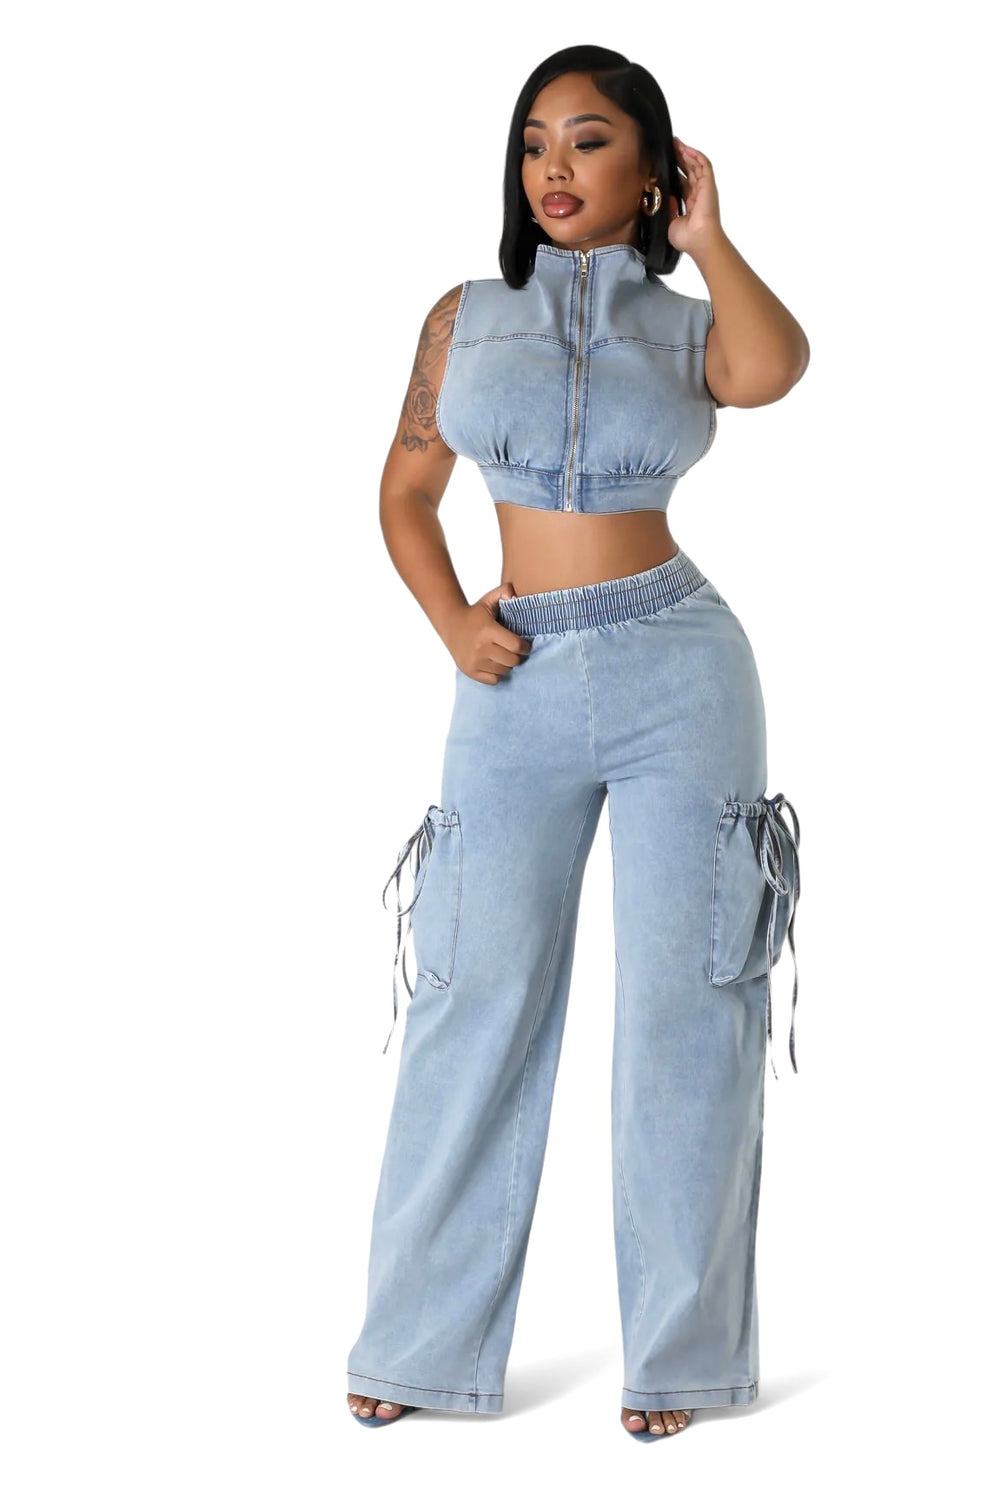 a woman in a crop top and jeans